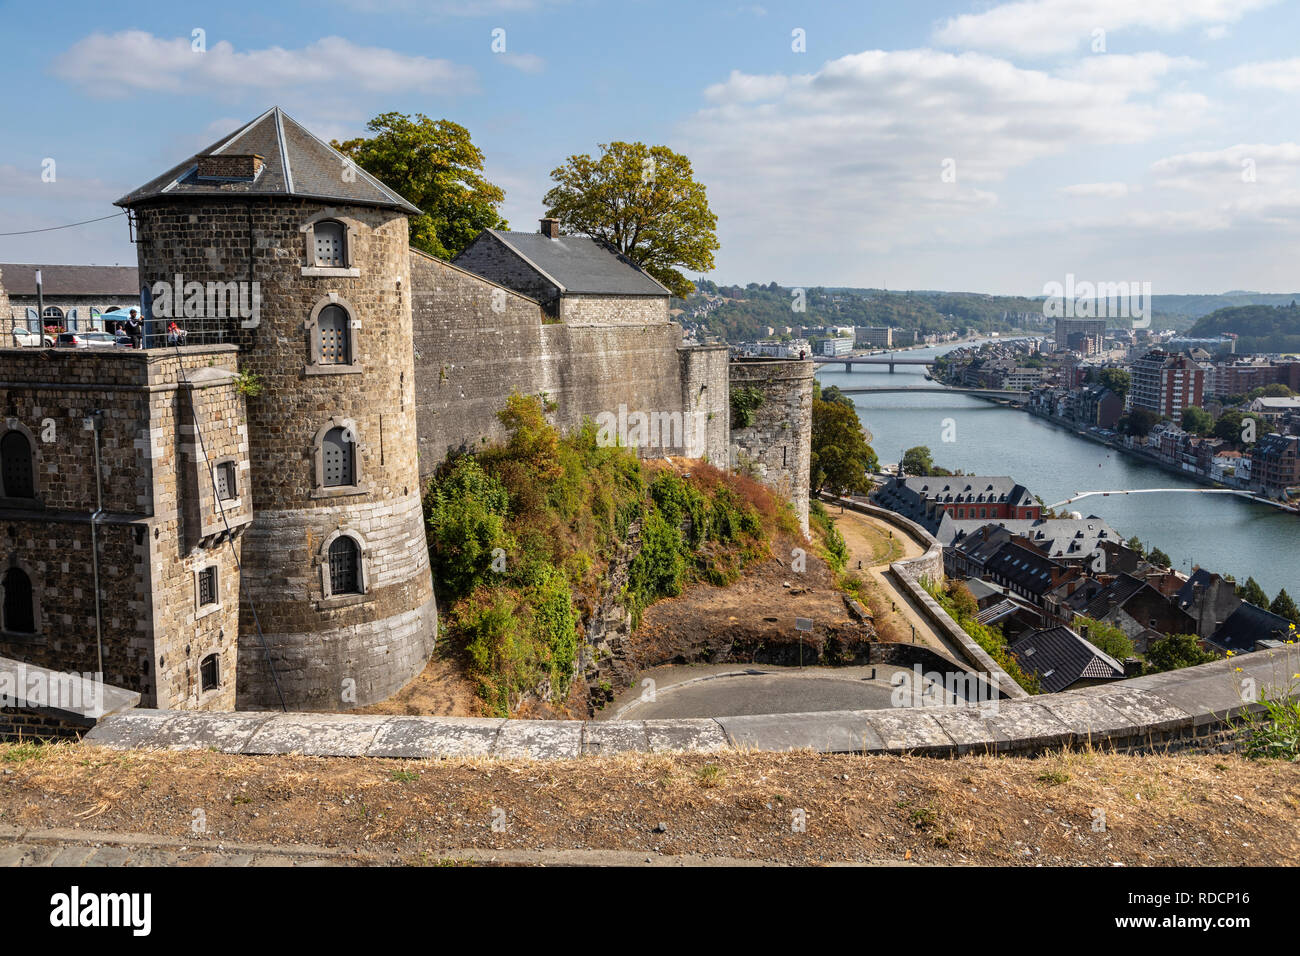 View of the River Meuse from the Citadel, Namur, Belgium Stock Photo